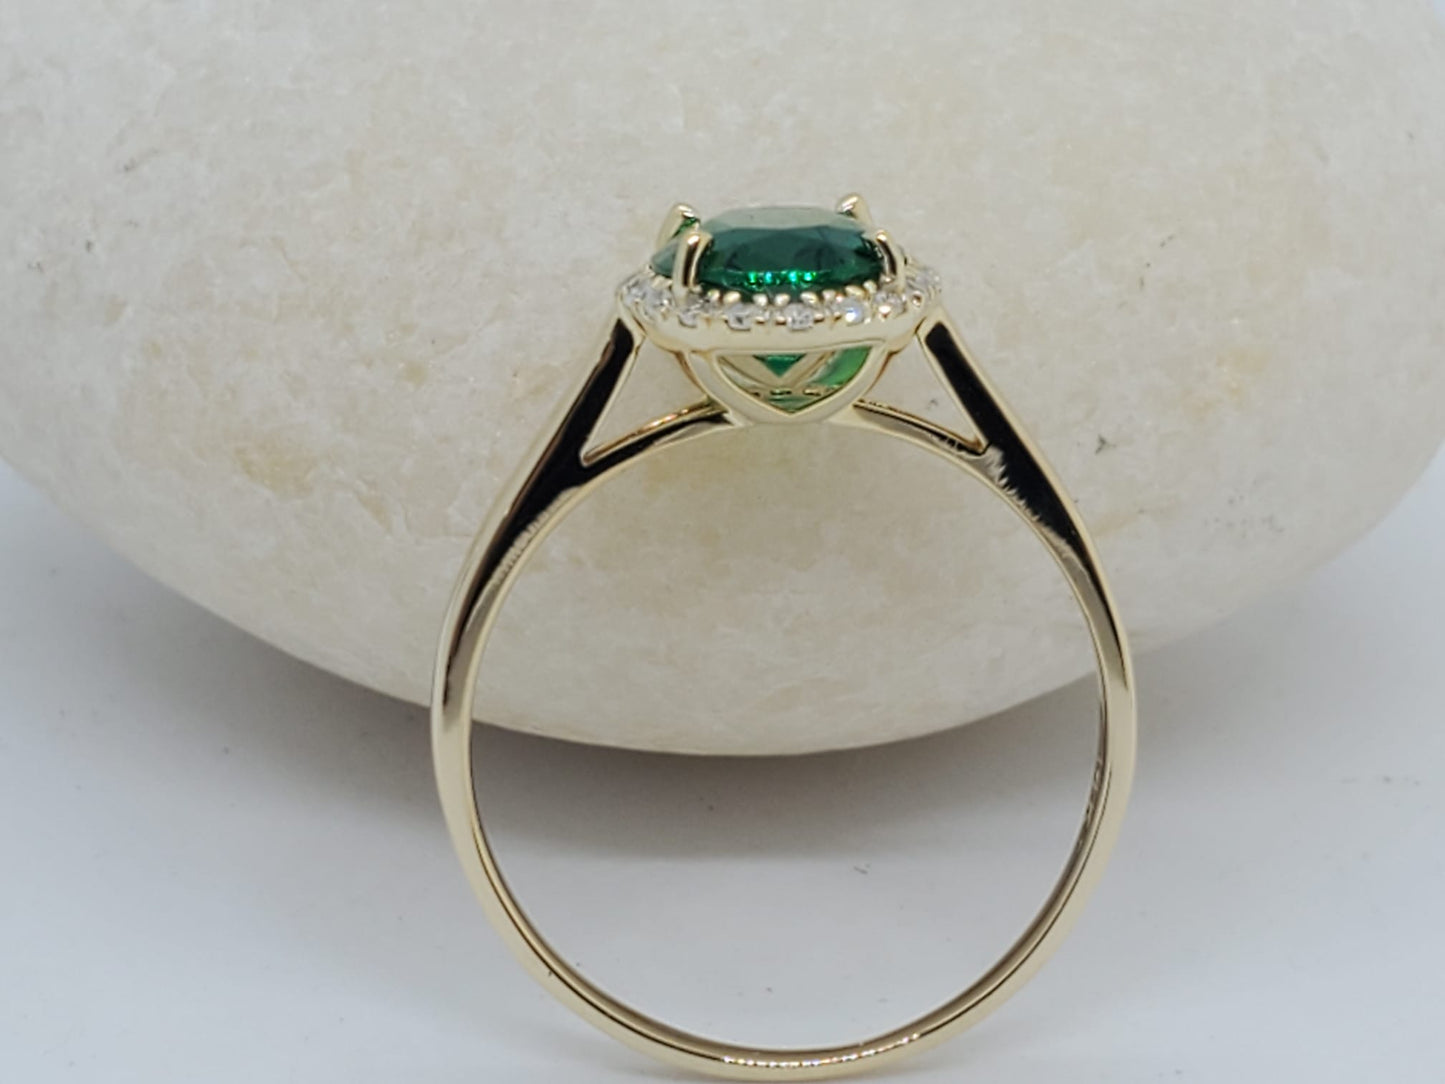 14K Yellow Gold Ring with Green Stone, it is solitaire ring, it is comfortable and elegant